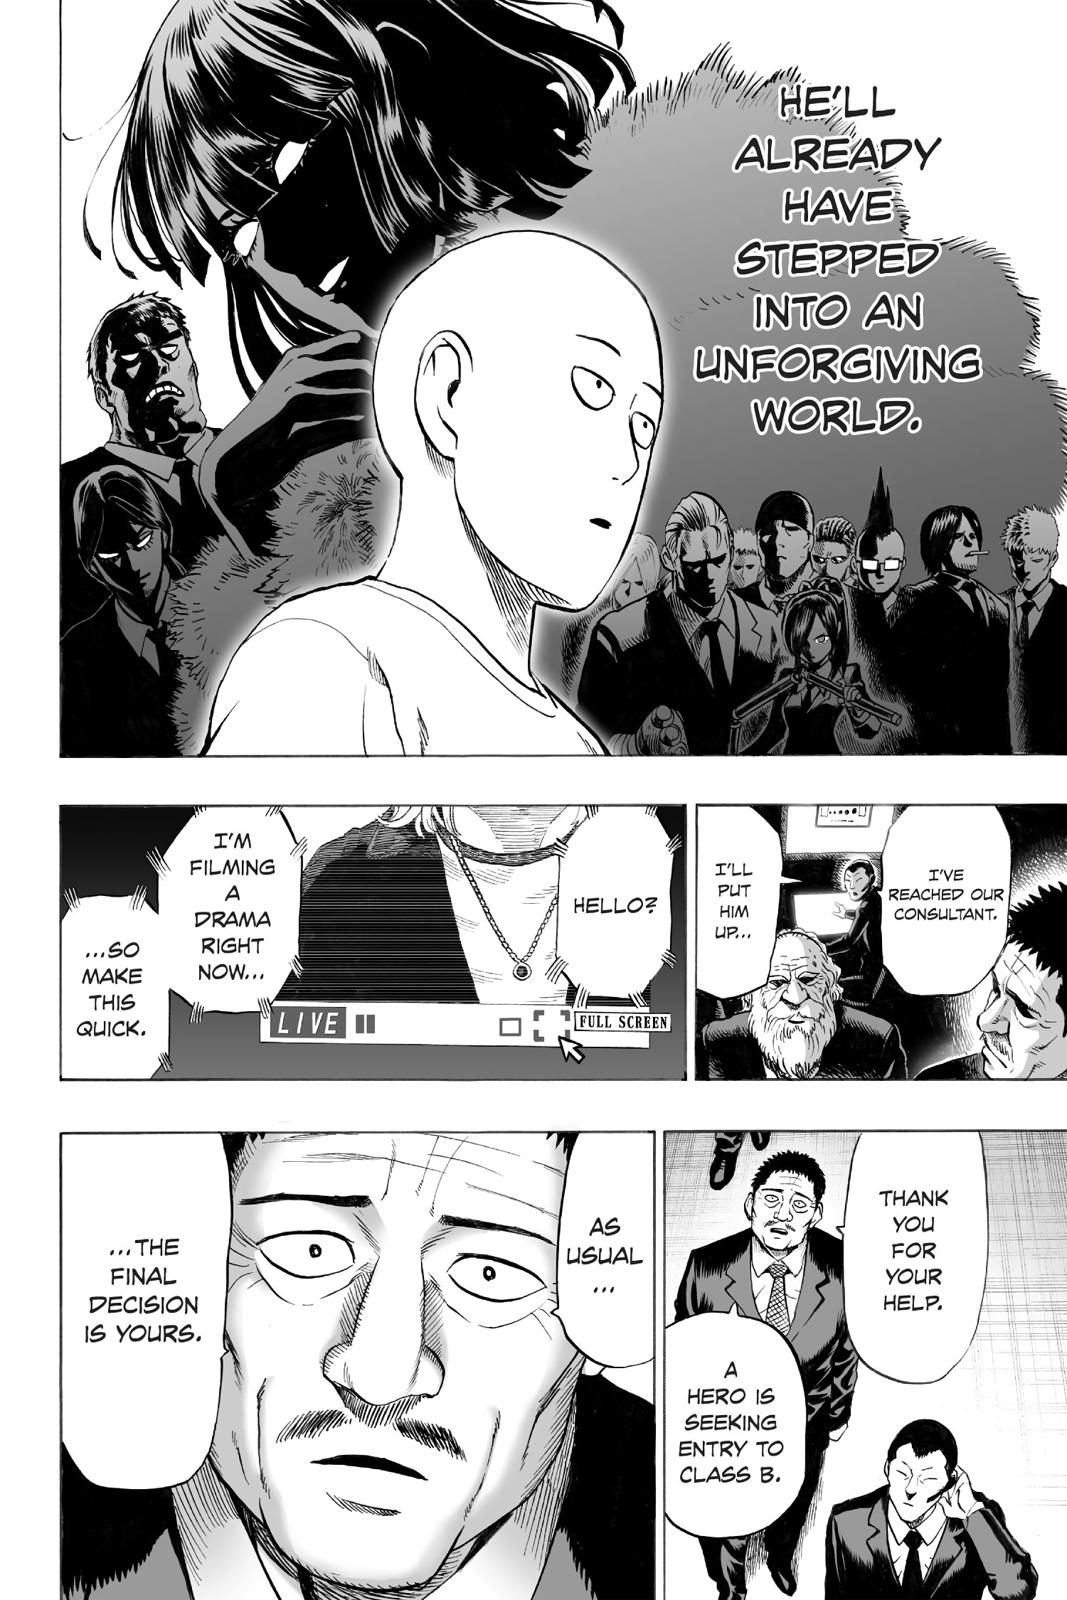 One-Punch Man, Punch 29 image 14